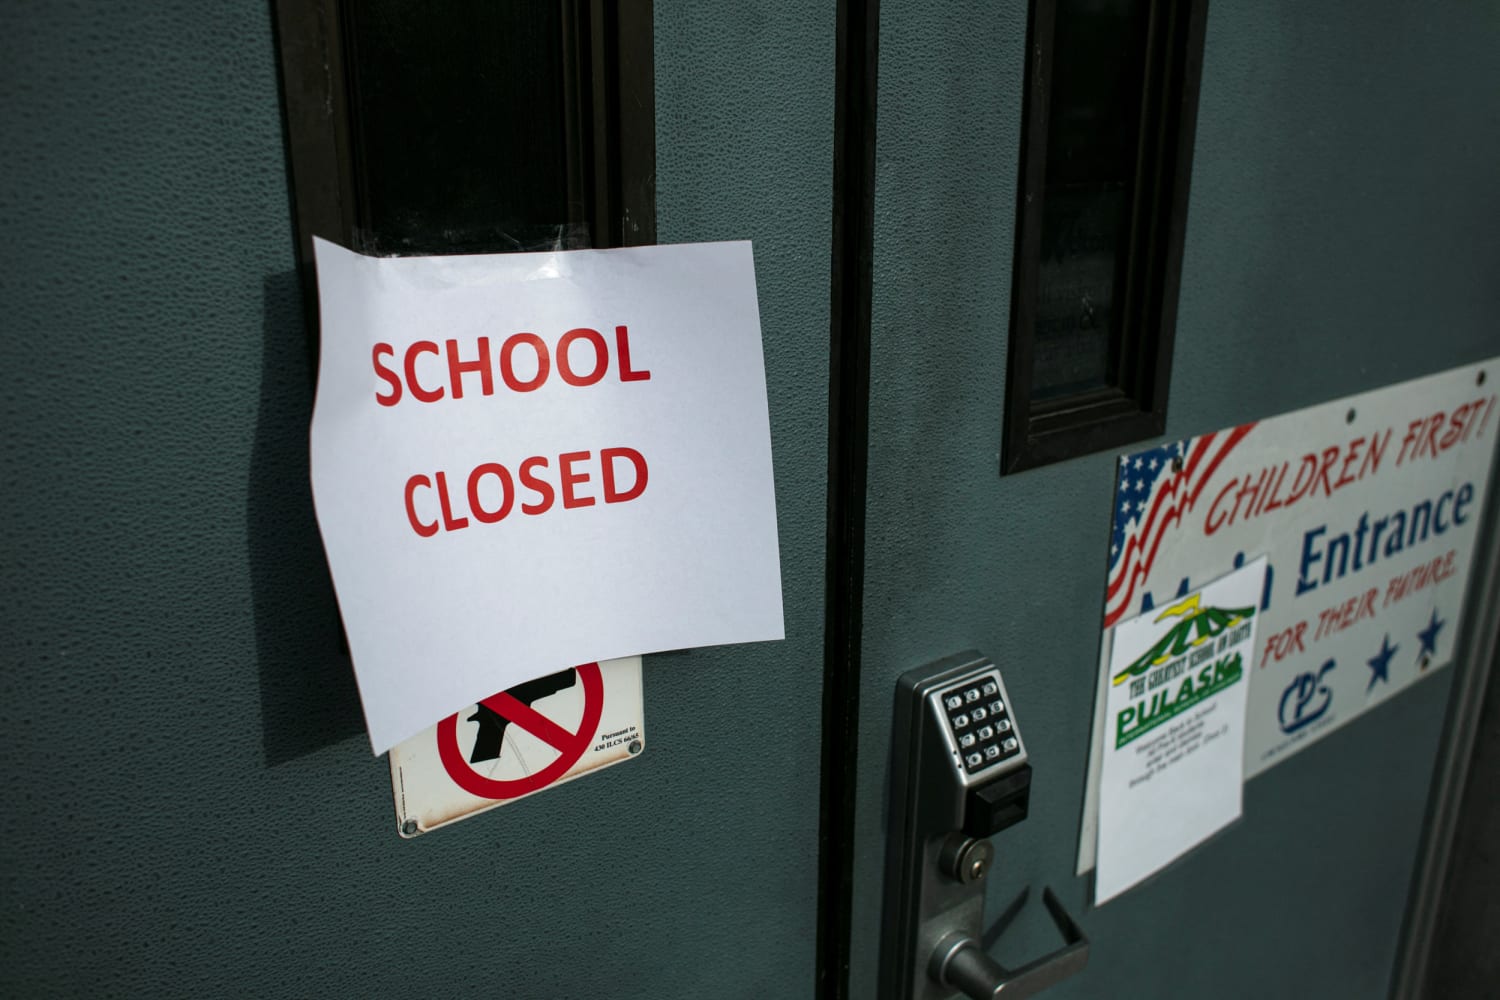 Chicago schools cancel classes again as fight with teachers over Covid hits second week